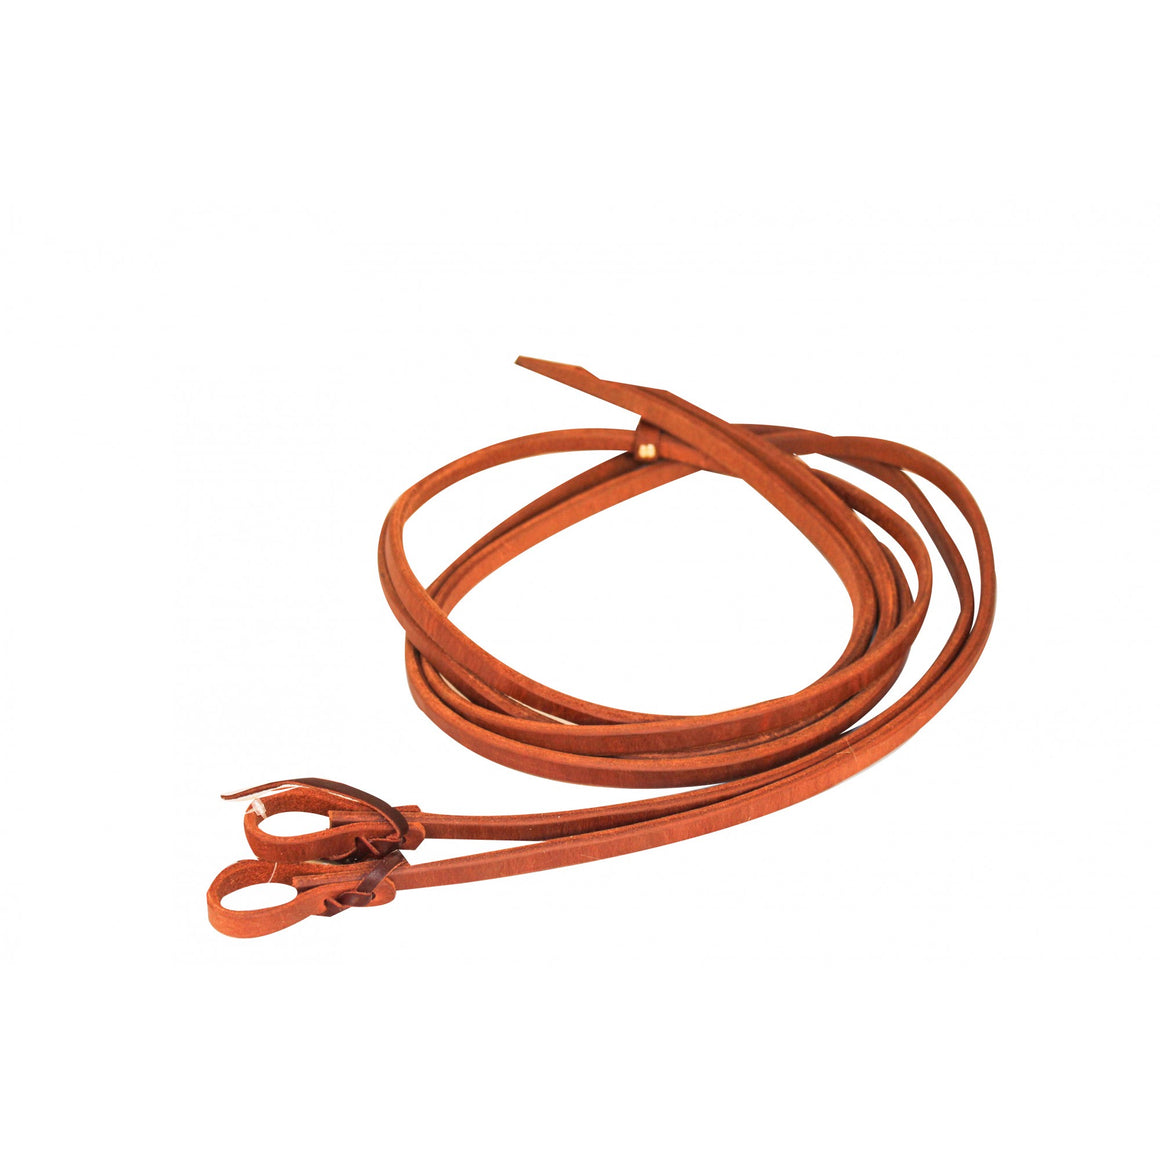 Western Rawhide Oiled Harness Leather Reins with Waterloops and Heavy Ends